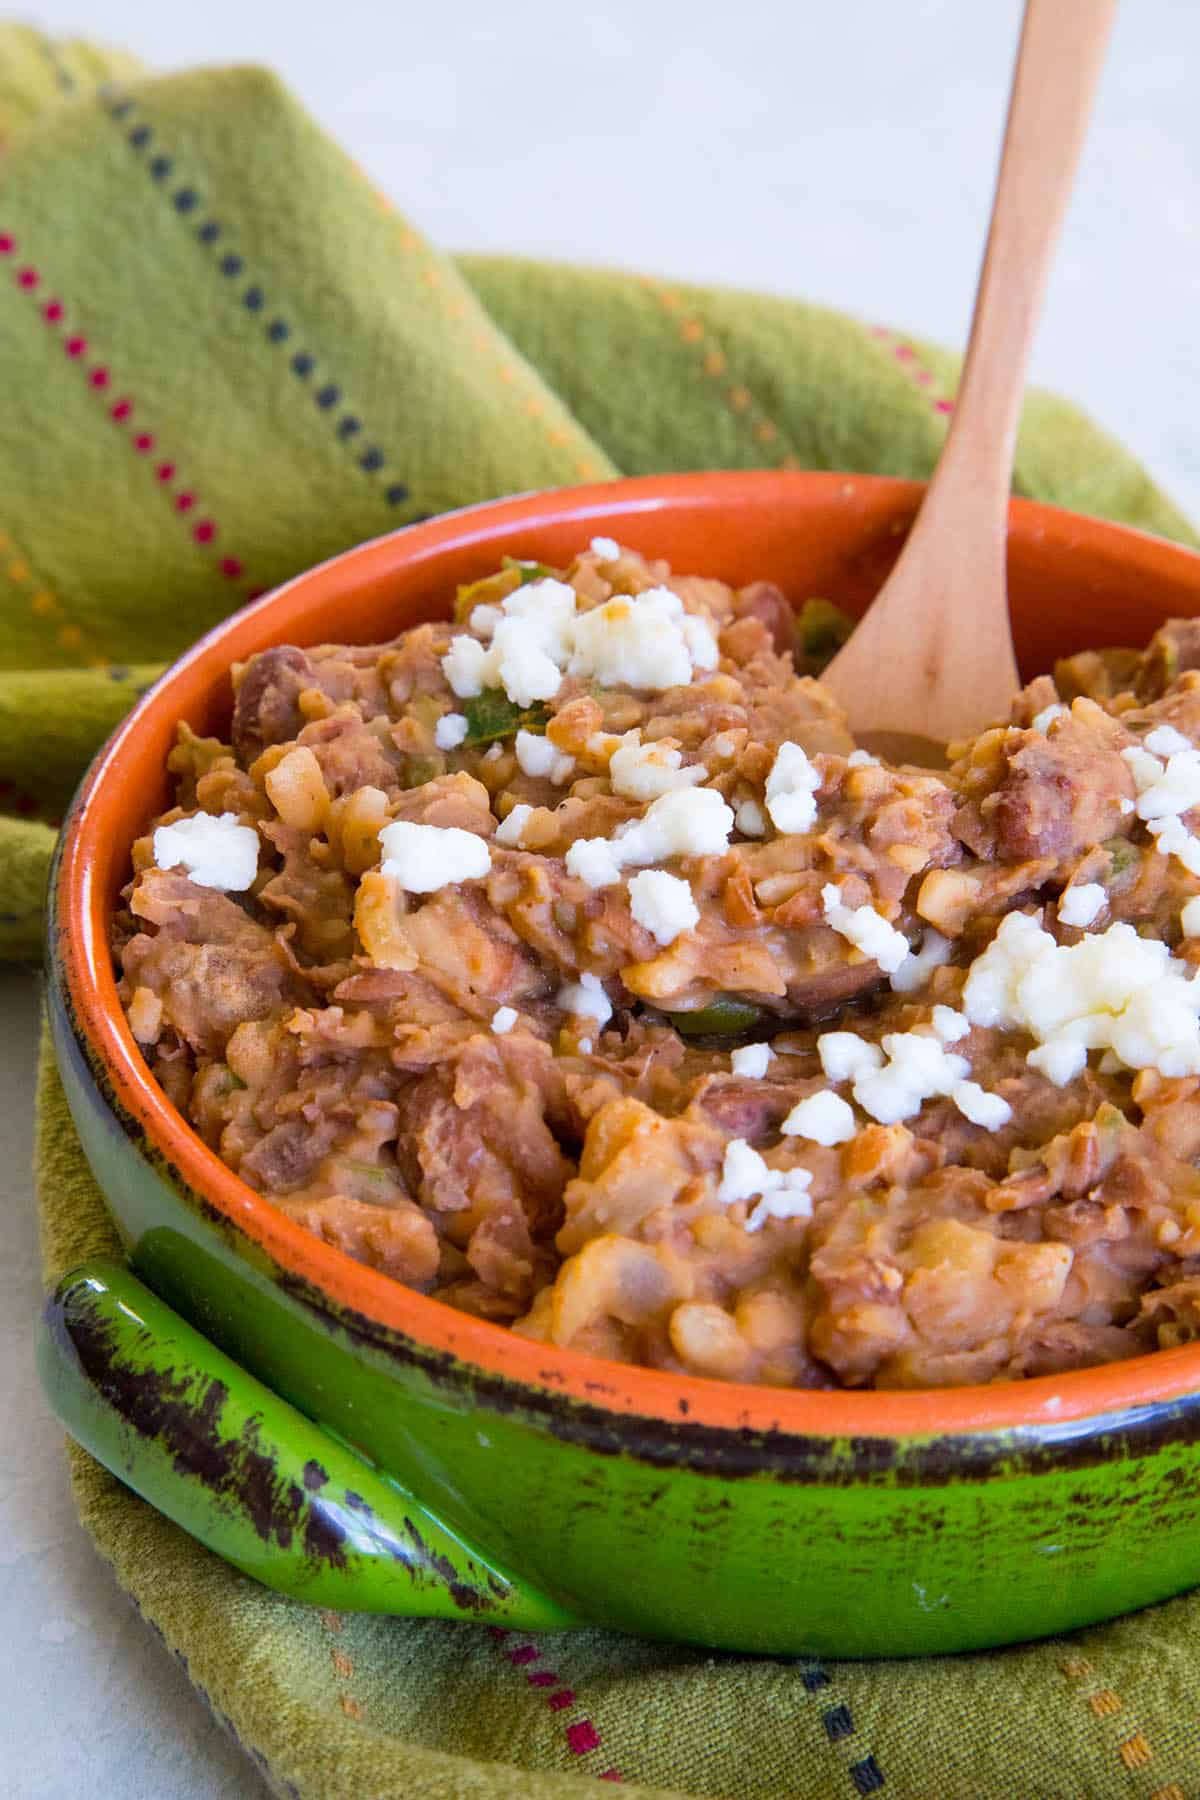 Easy Homemade Refried Beans in a bowl, with a serving spoon